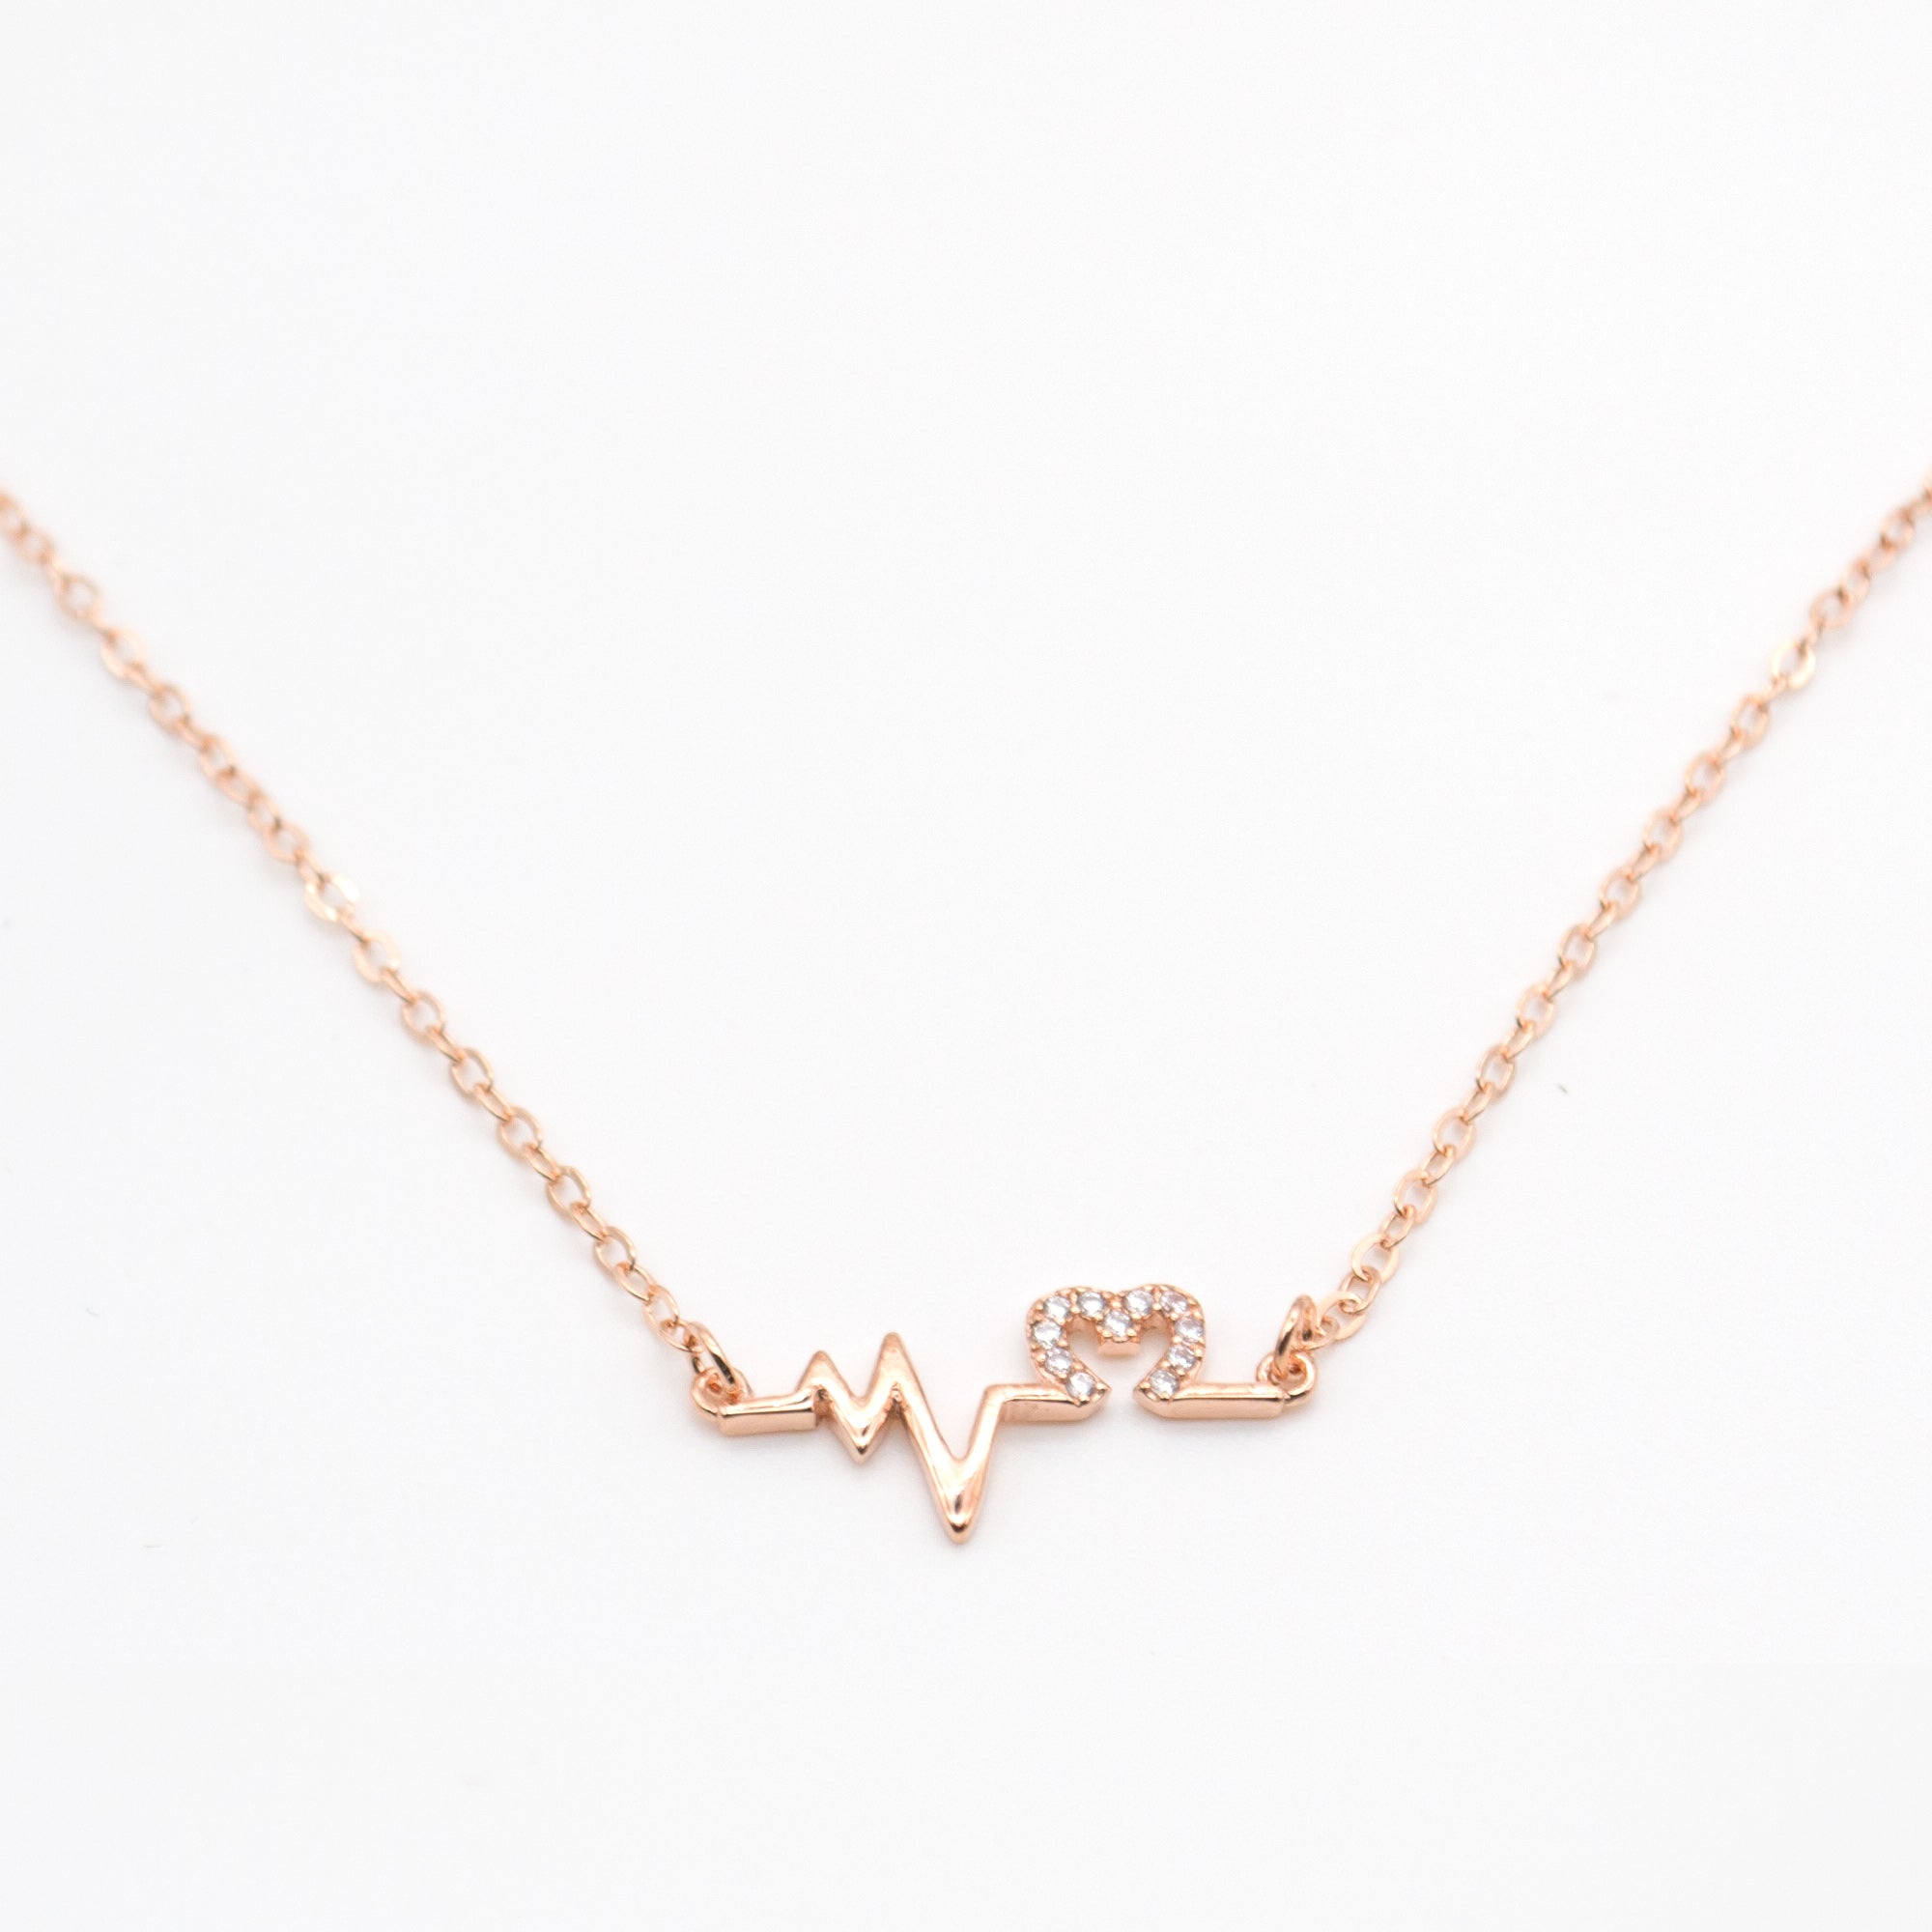 Jewdii Rose Gold 925 Silver Pendant Necklace with Cubic Zirconia